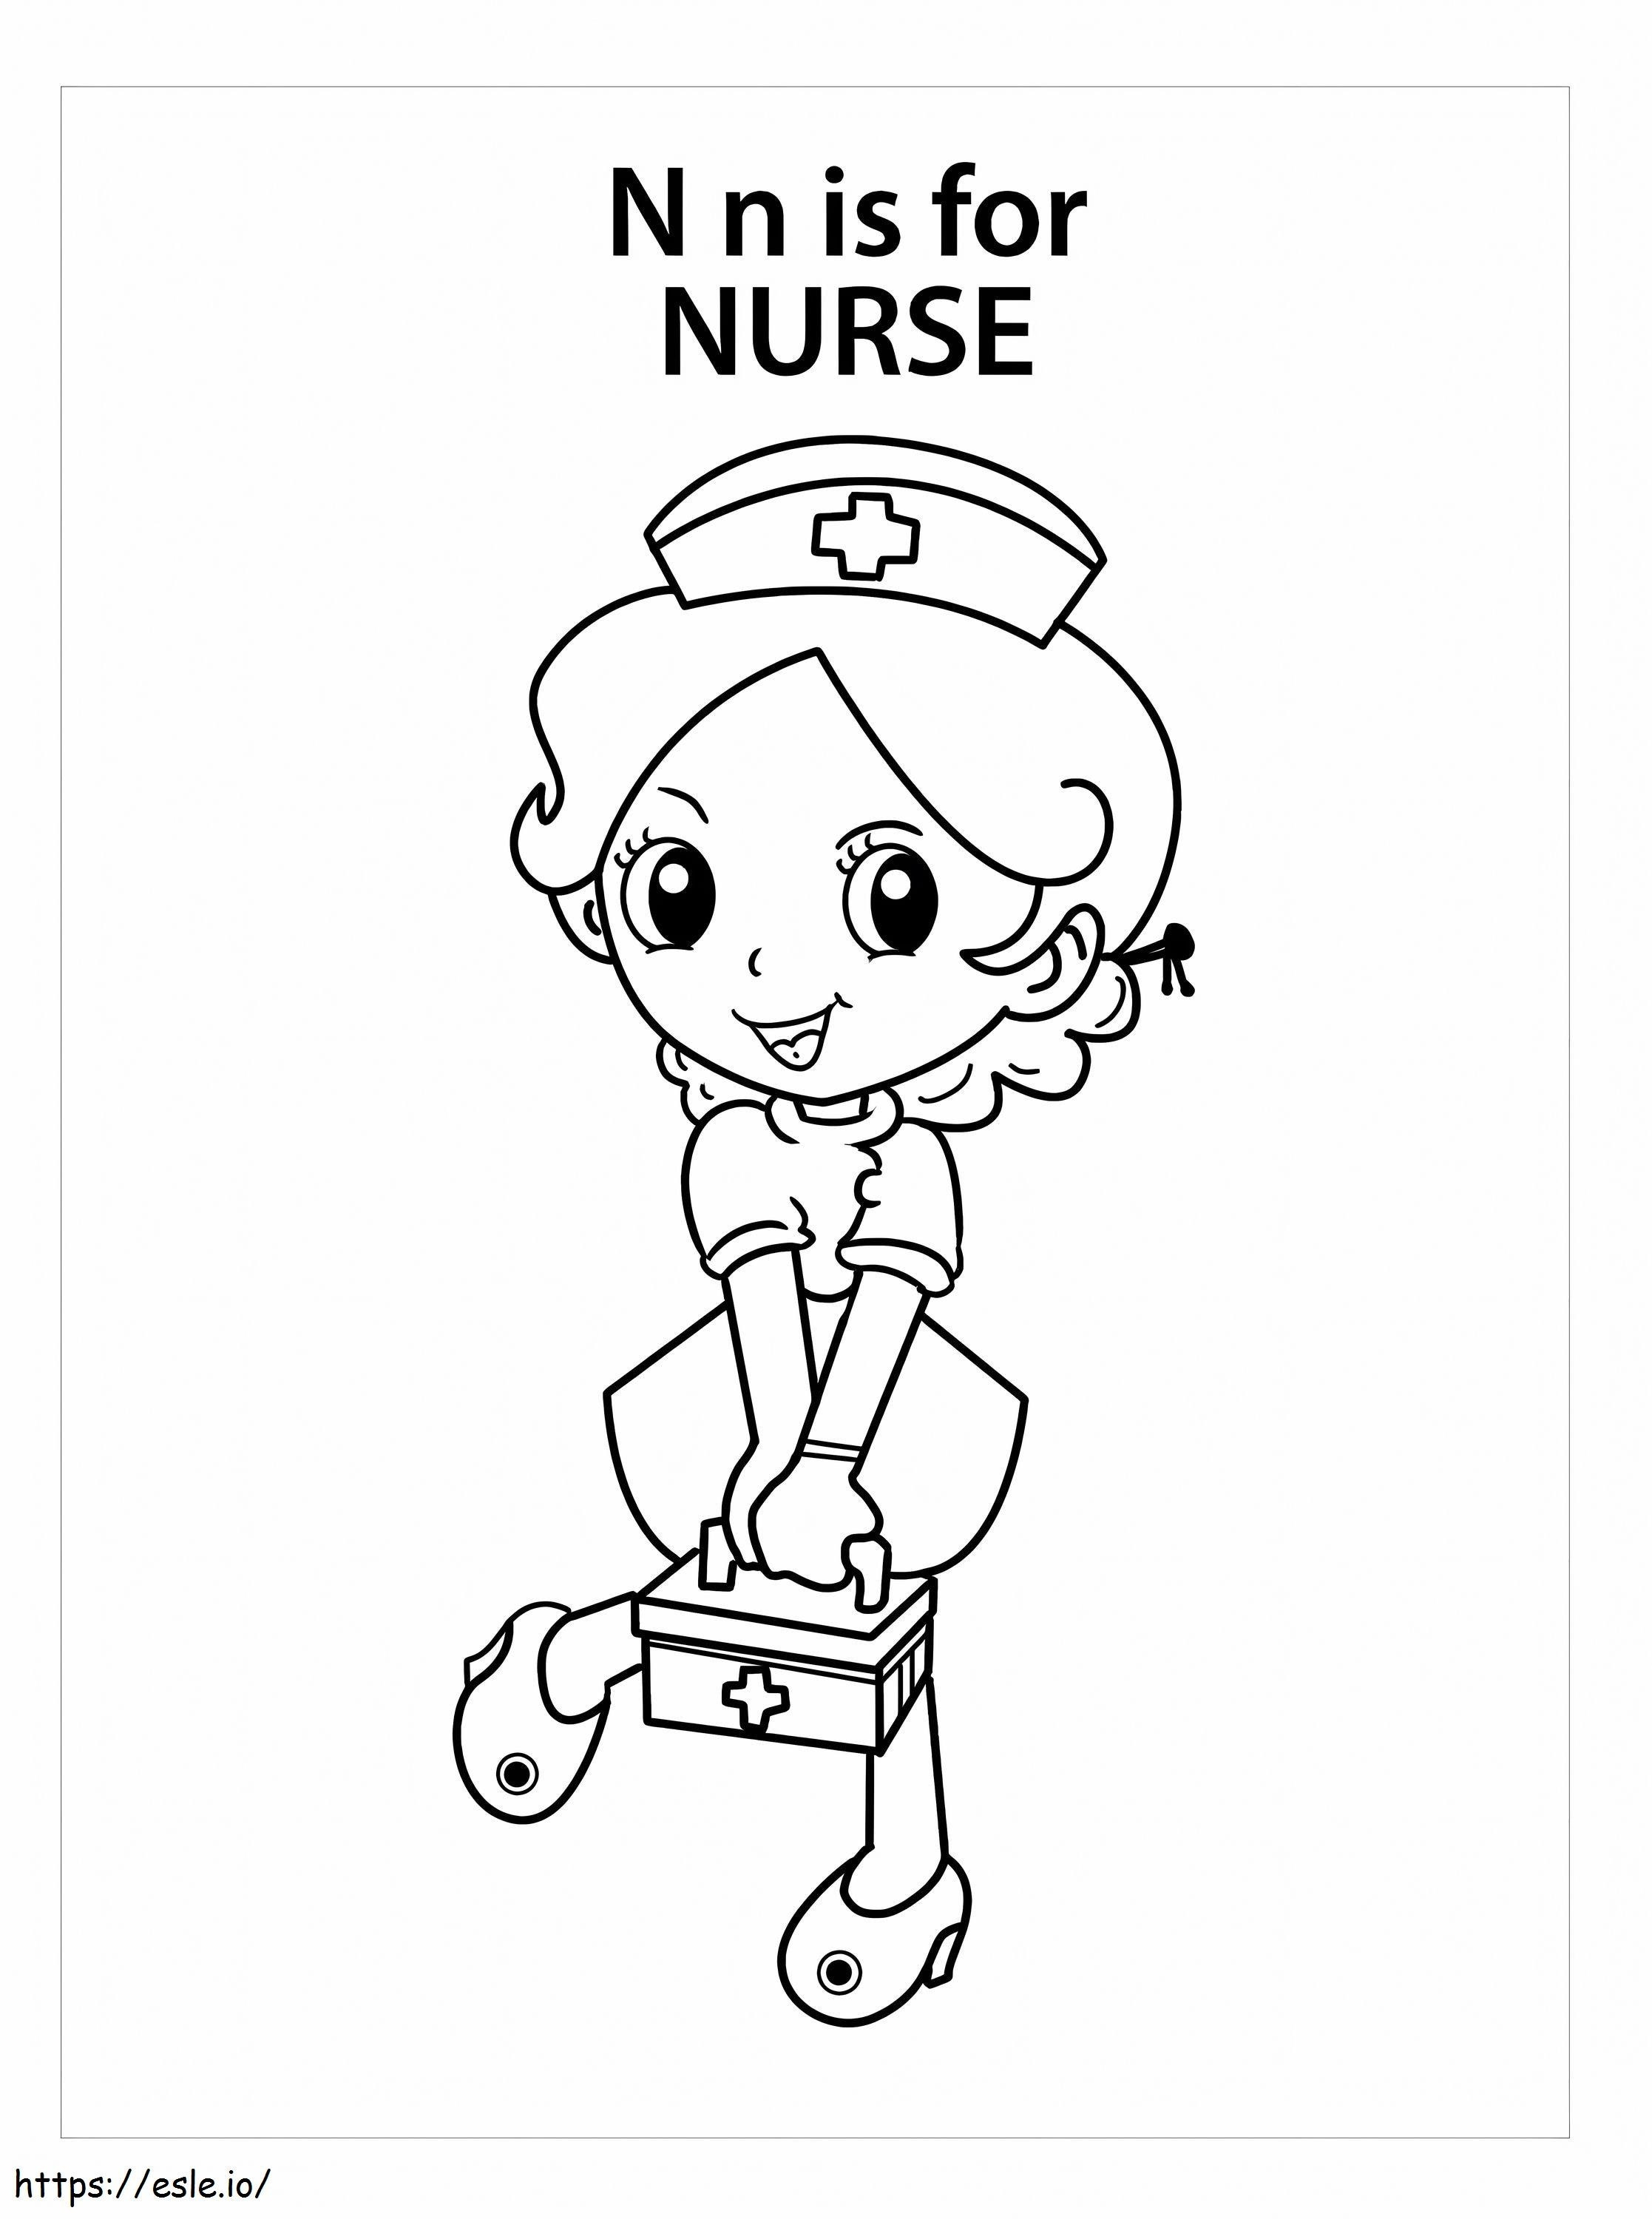 The Letter N Is For Nurse coloring page